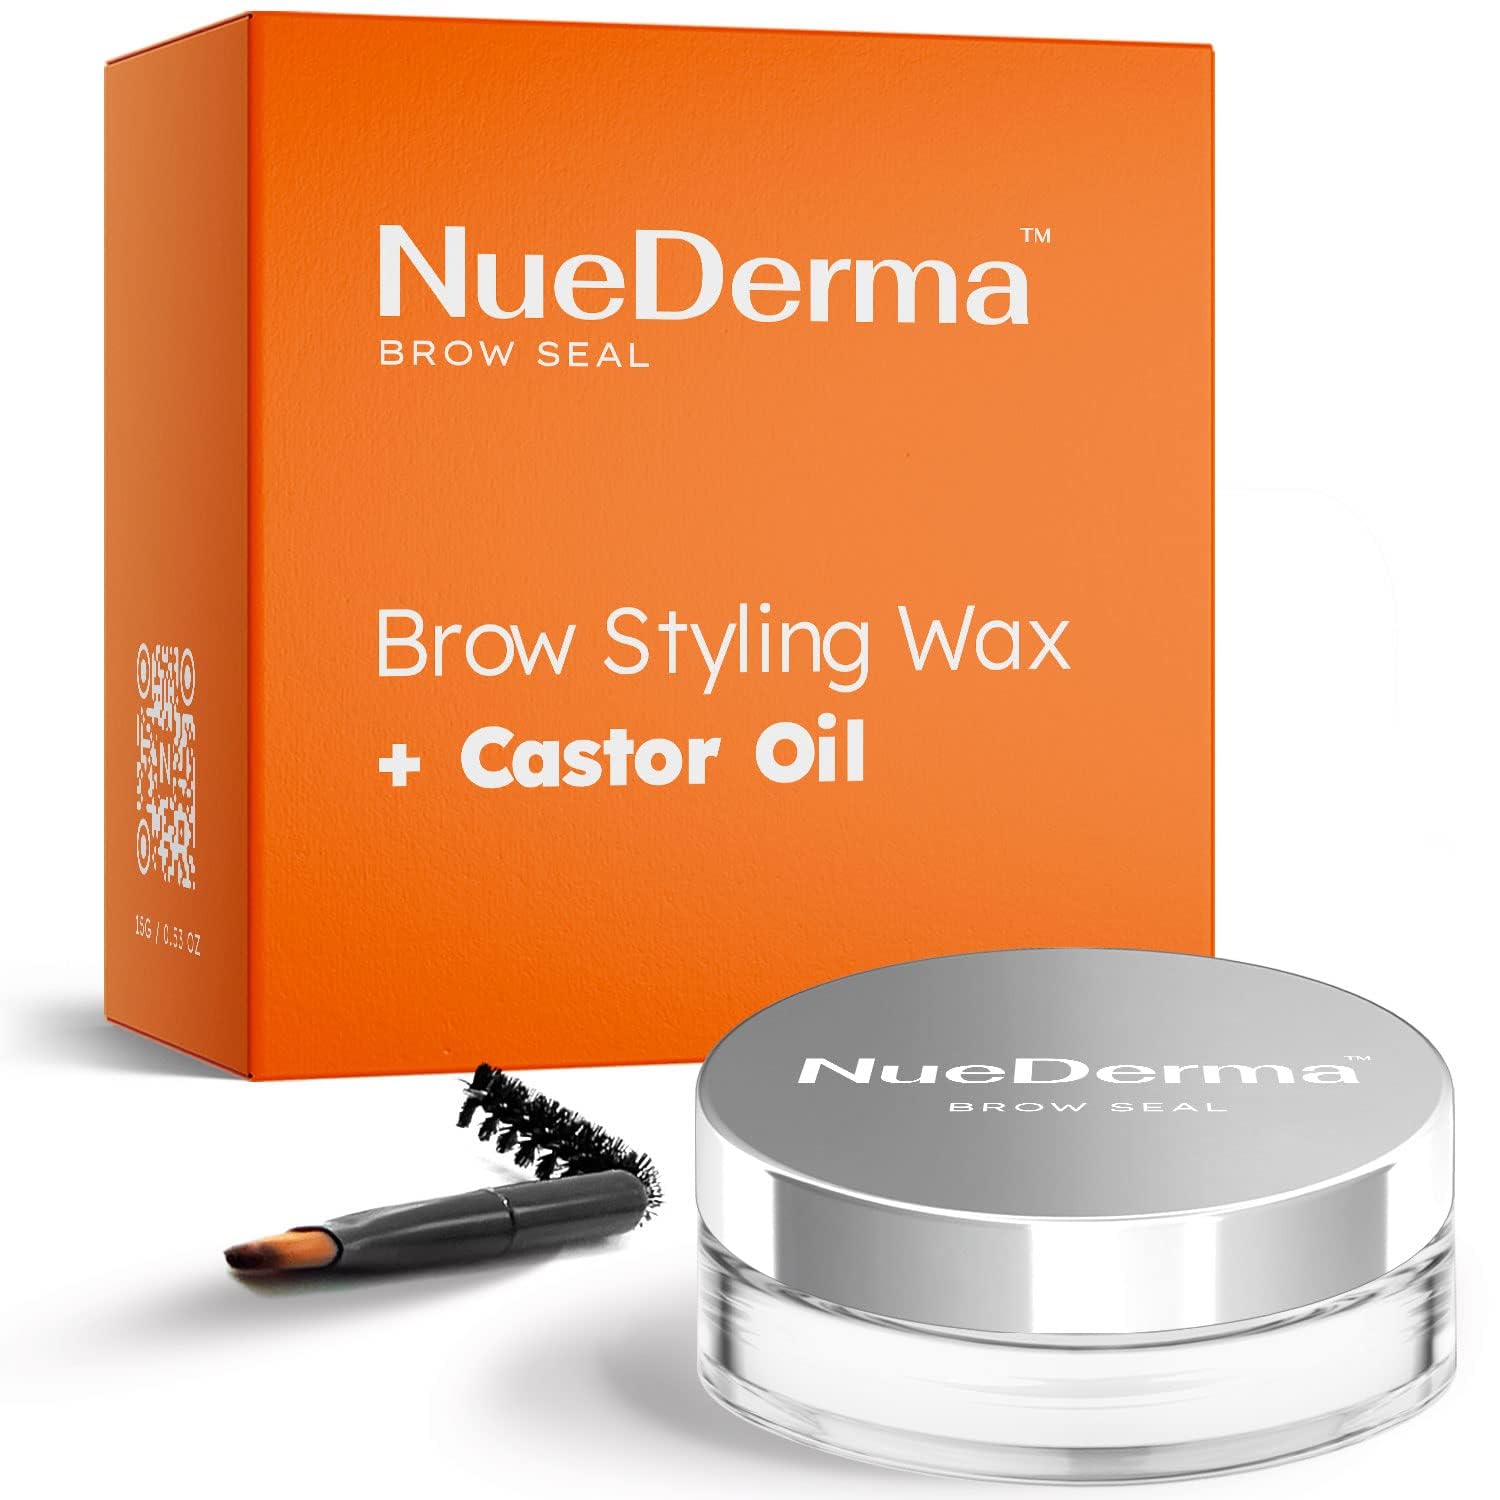 NueDerma - Brow Seal with Castor Oil - Clear Eyebrow Gel, Brow Wax, Waterproof Eyebrow Makeup, Brow Styling Wax for Feathered & uffy Brows - 1